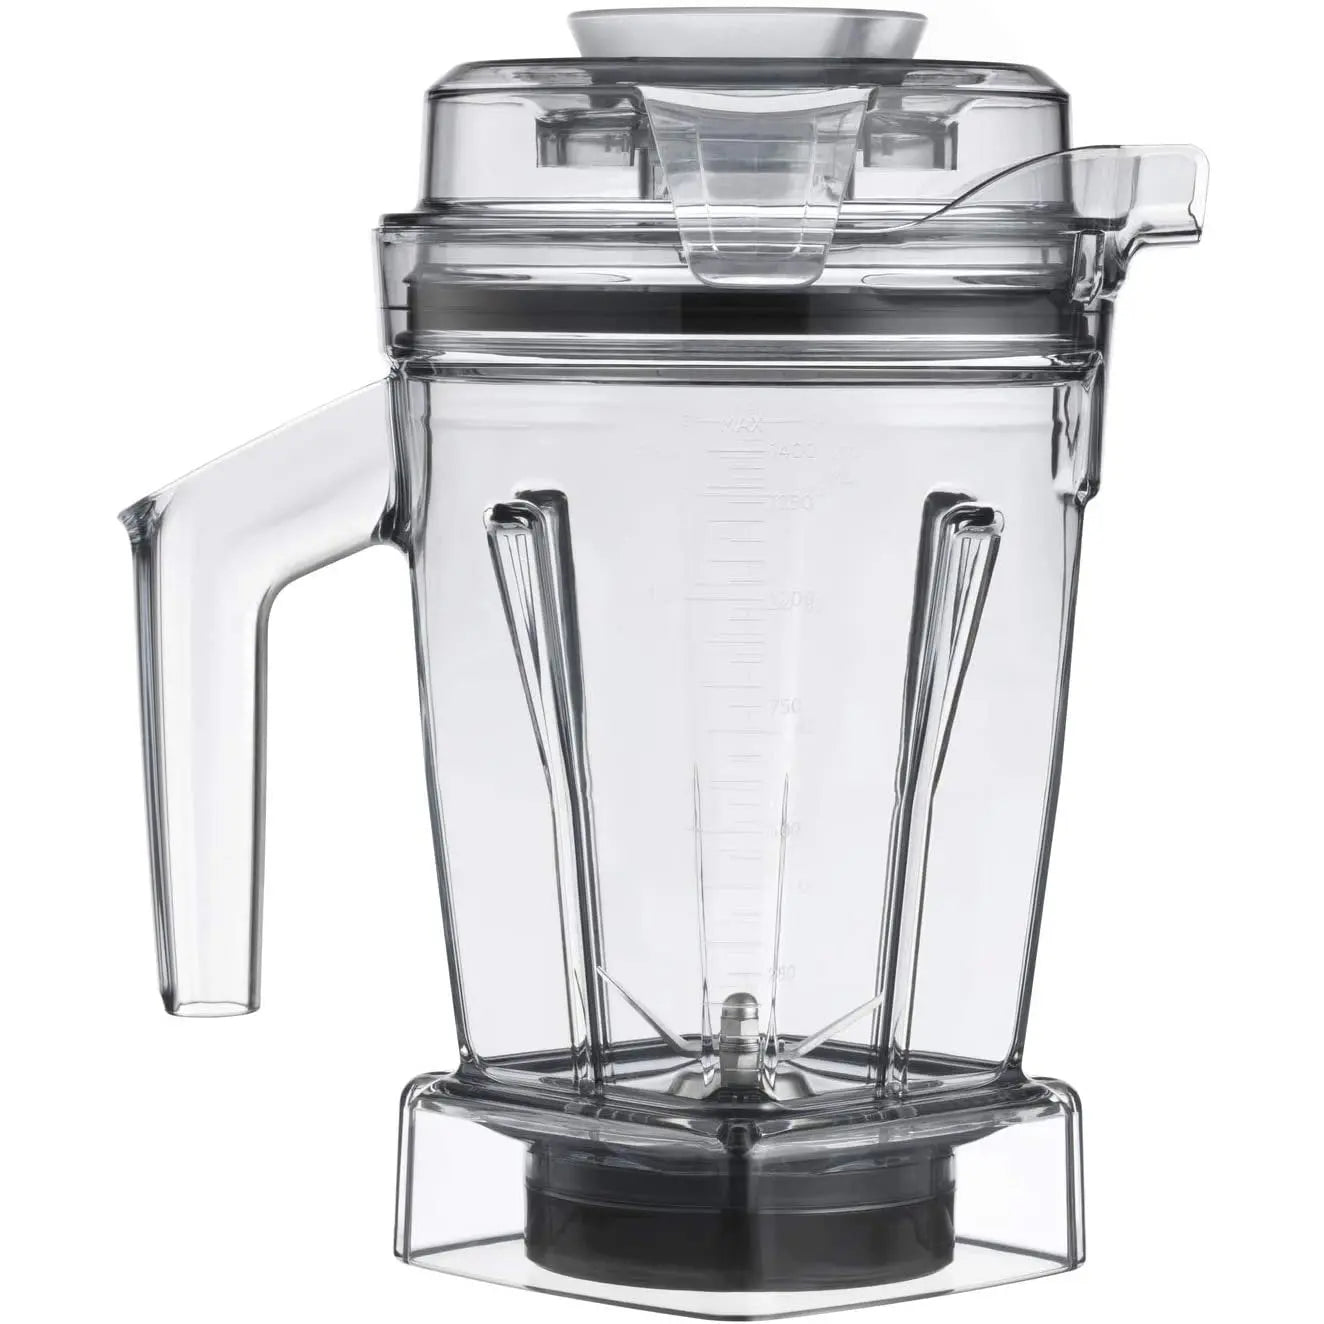 Vitamix Ascent Series Dry Grains Container, 48 oz. with SELF-DETECT VITAMIX